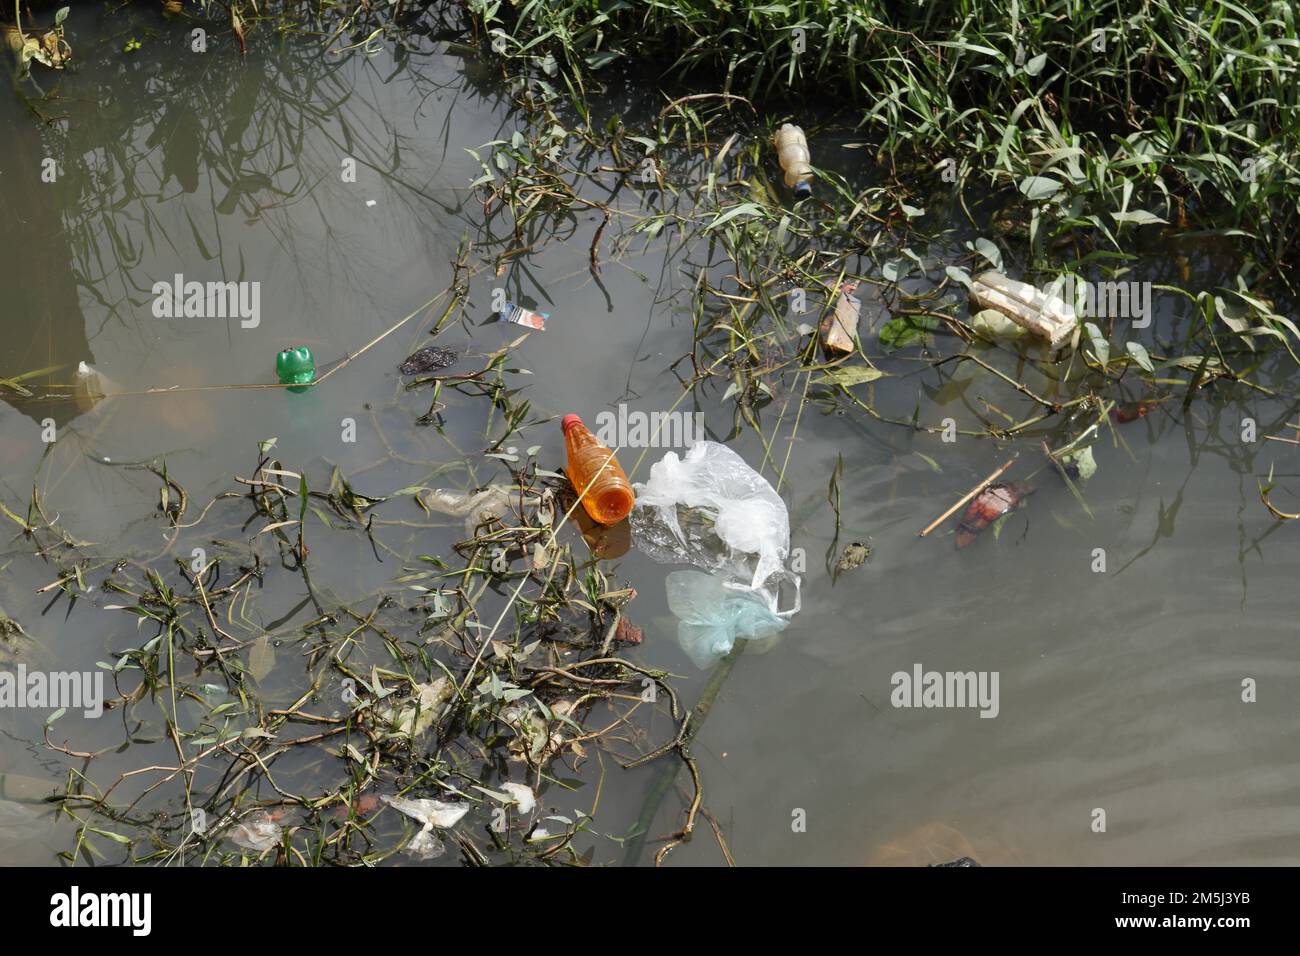 A small waterway filled with rubbish like Plastic waste and polythene bags and weed plants in Sri Lanka Stock Photo